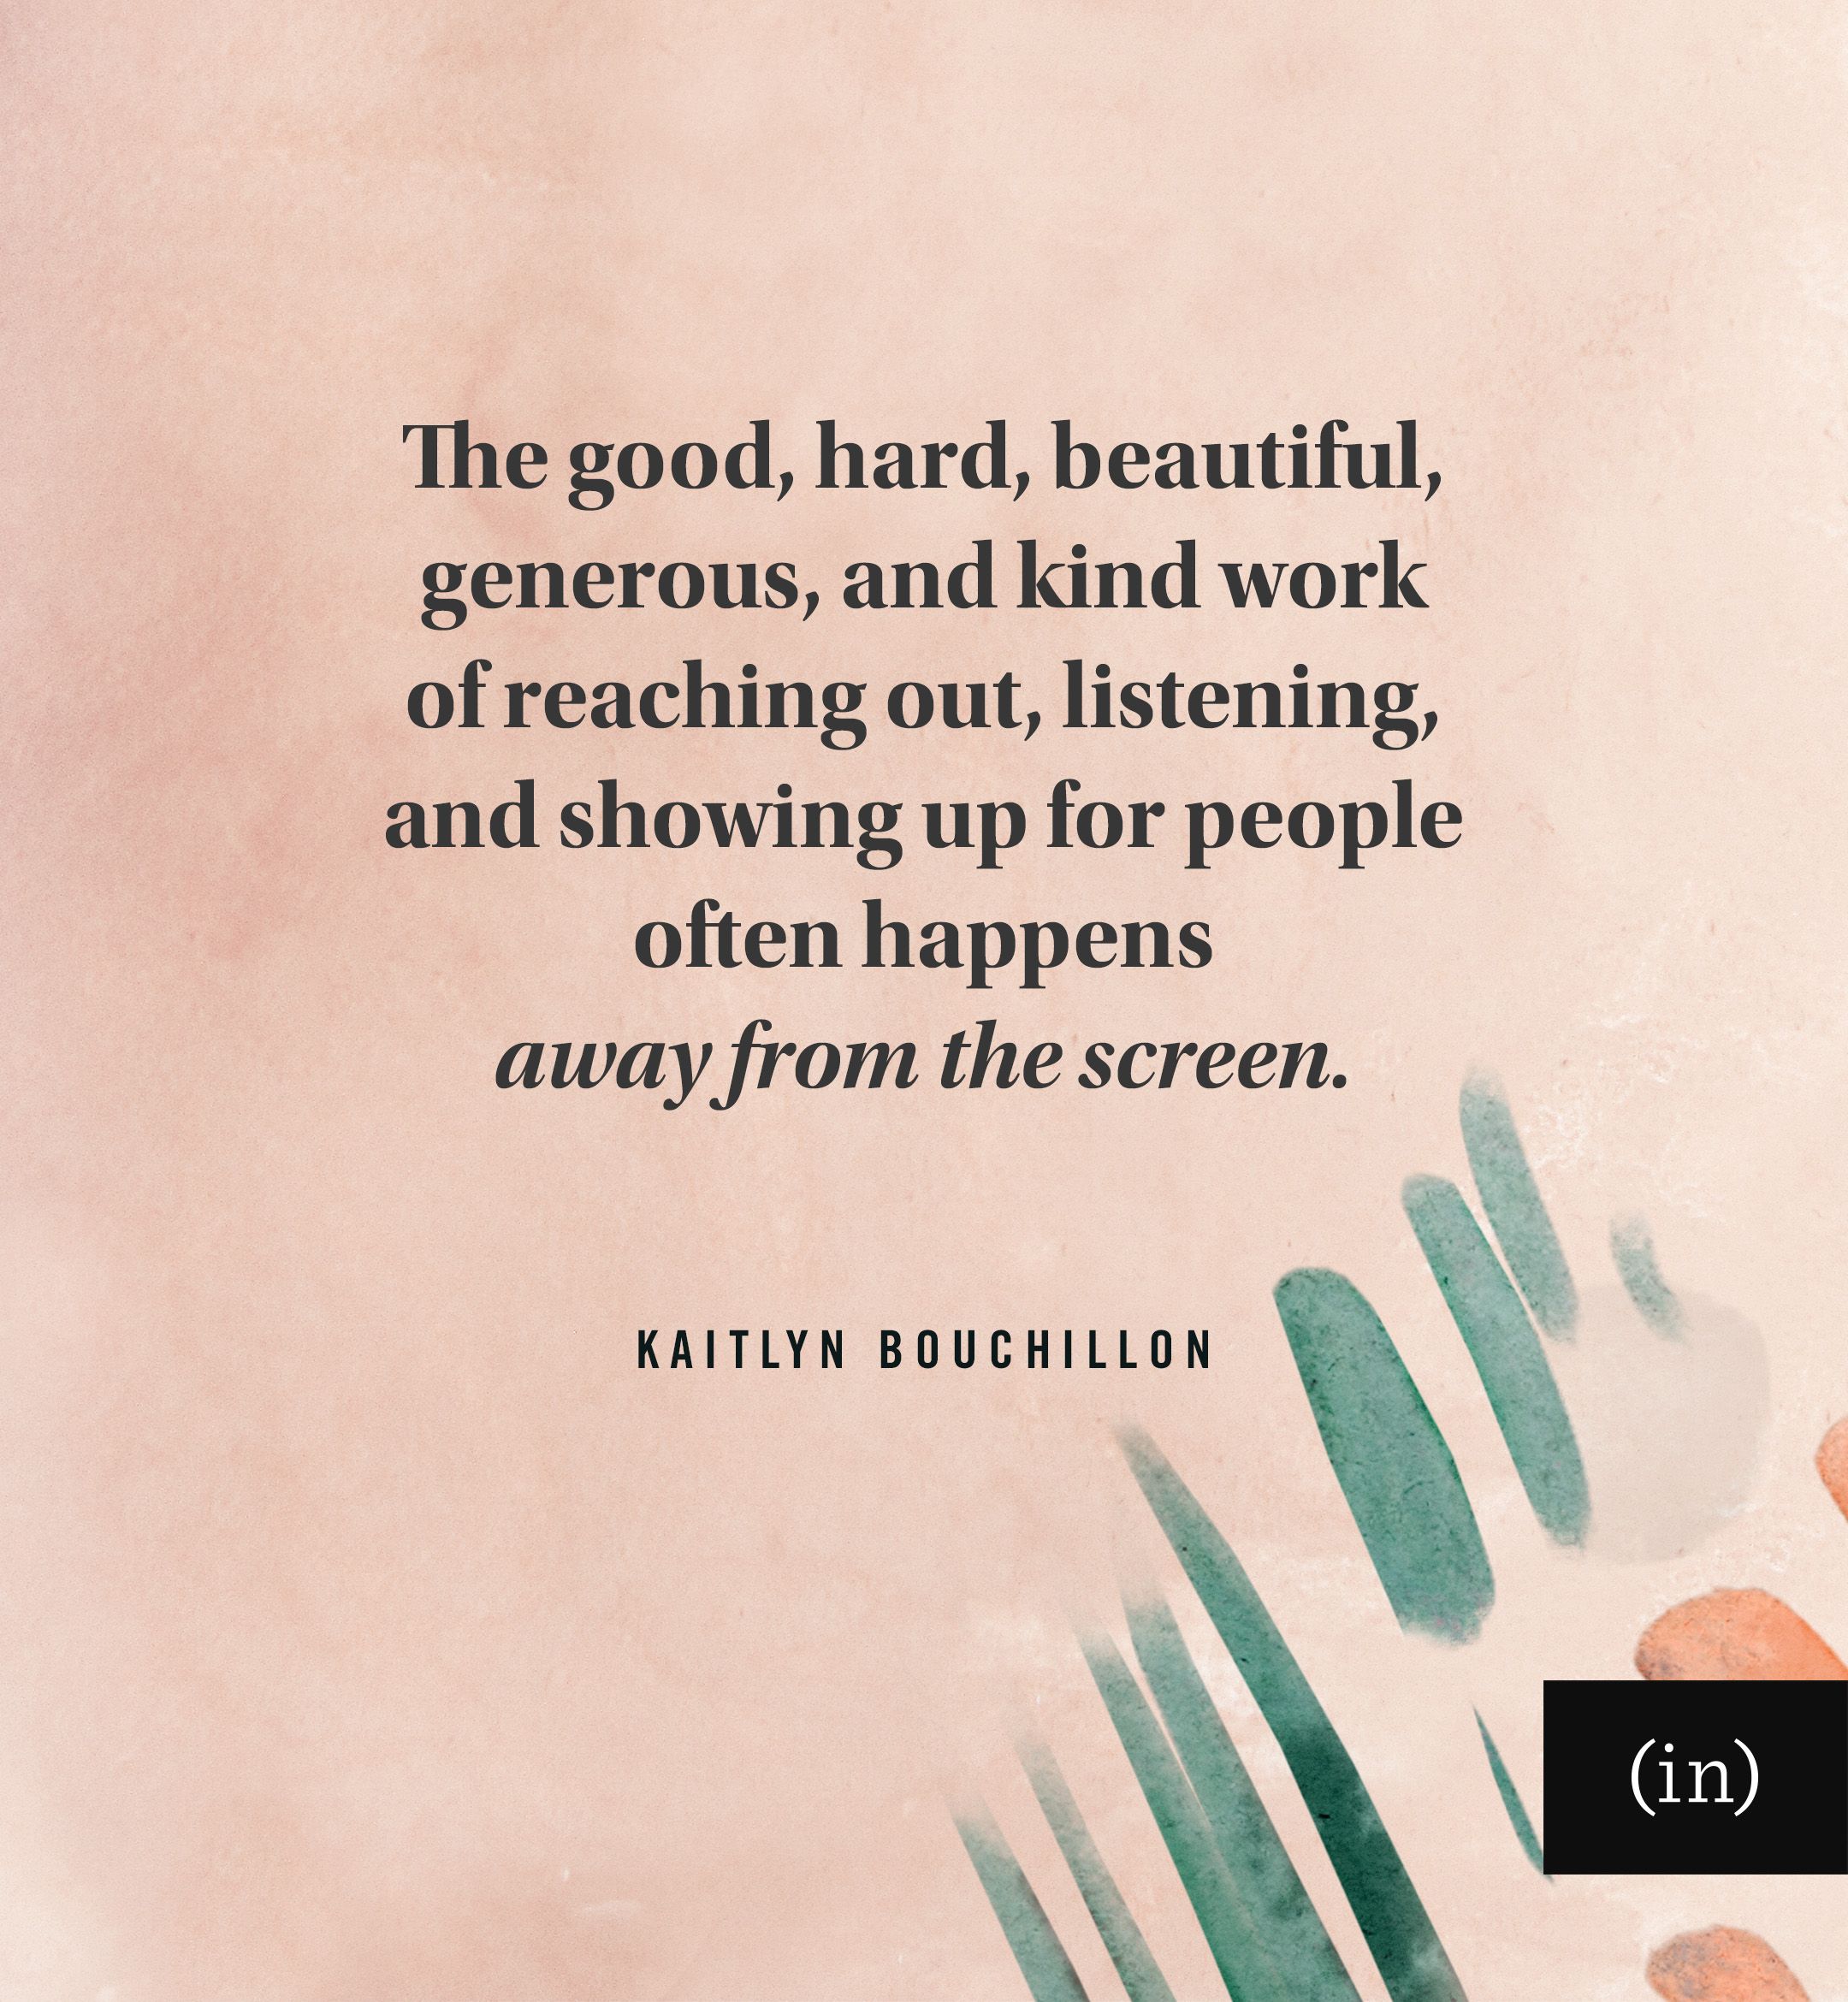 The good, hard, beautiful, generous, and kind work of reaching out, listening, and showing up for people often happens away from the screen.